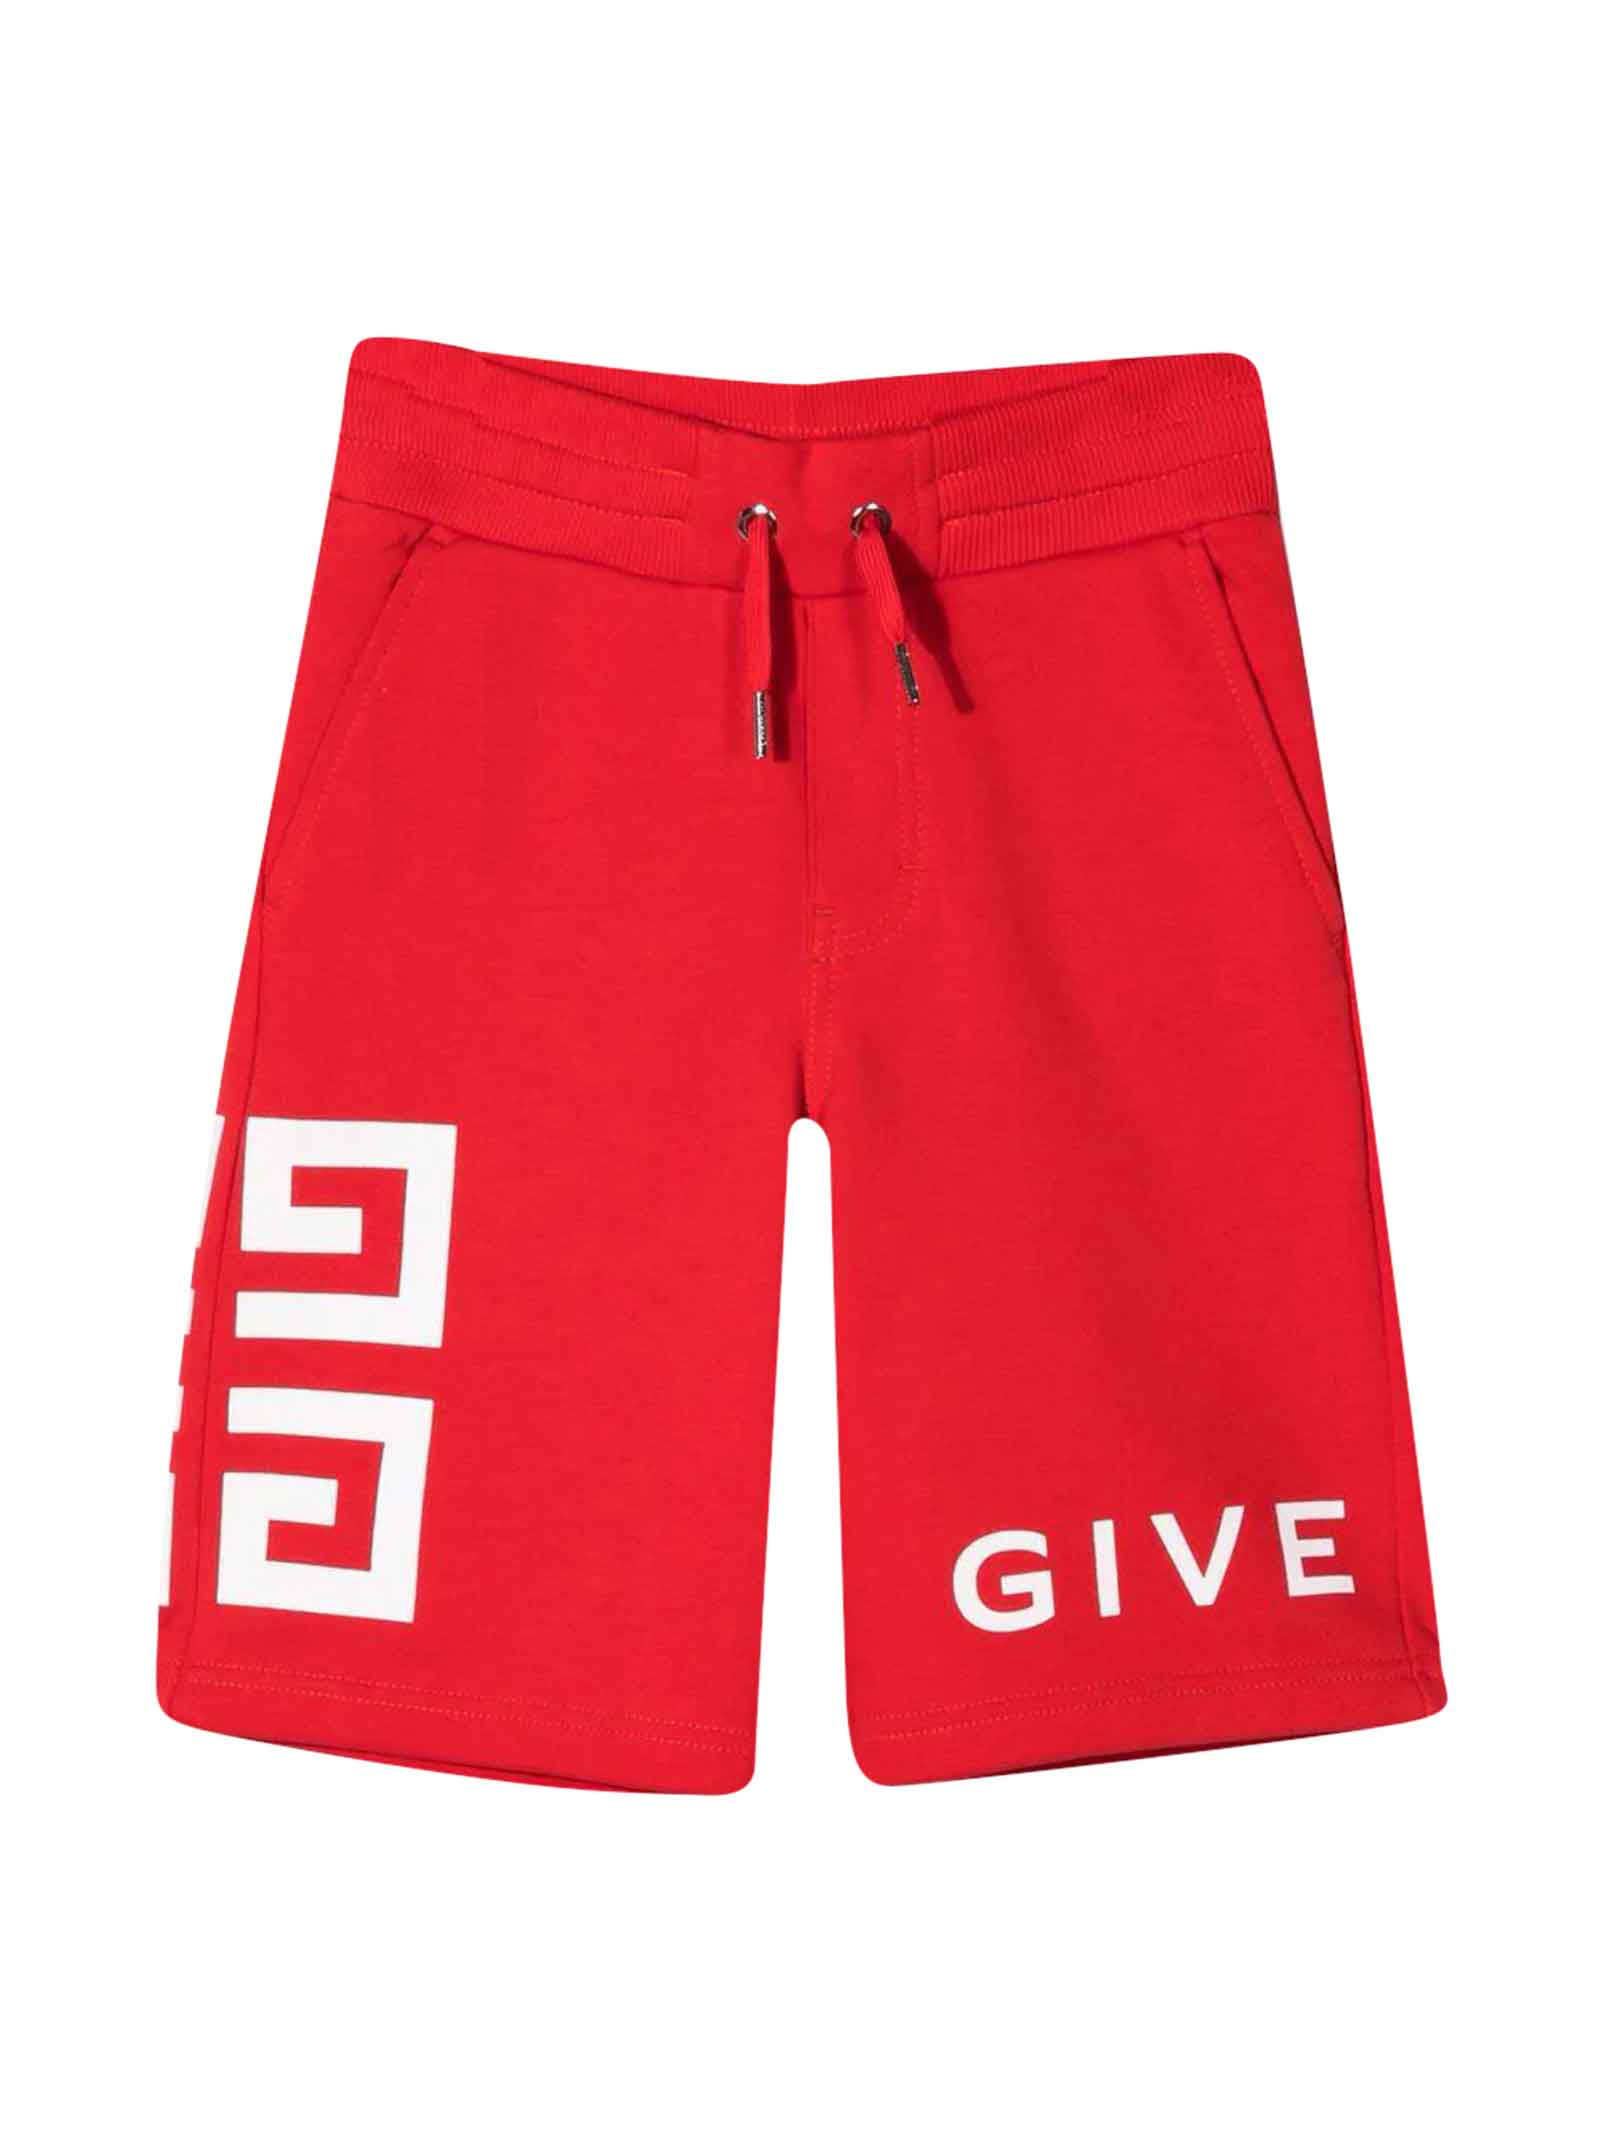 Givenchy Red Bermuda Shorts With White Print